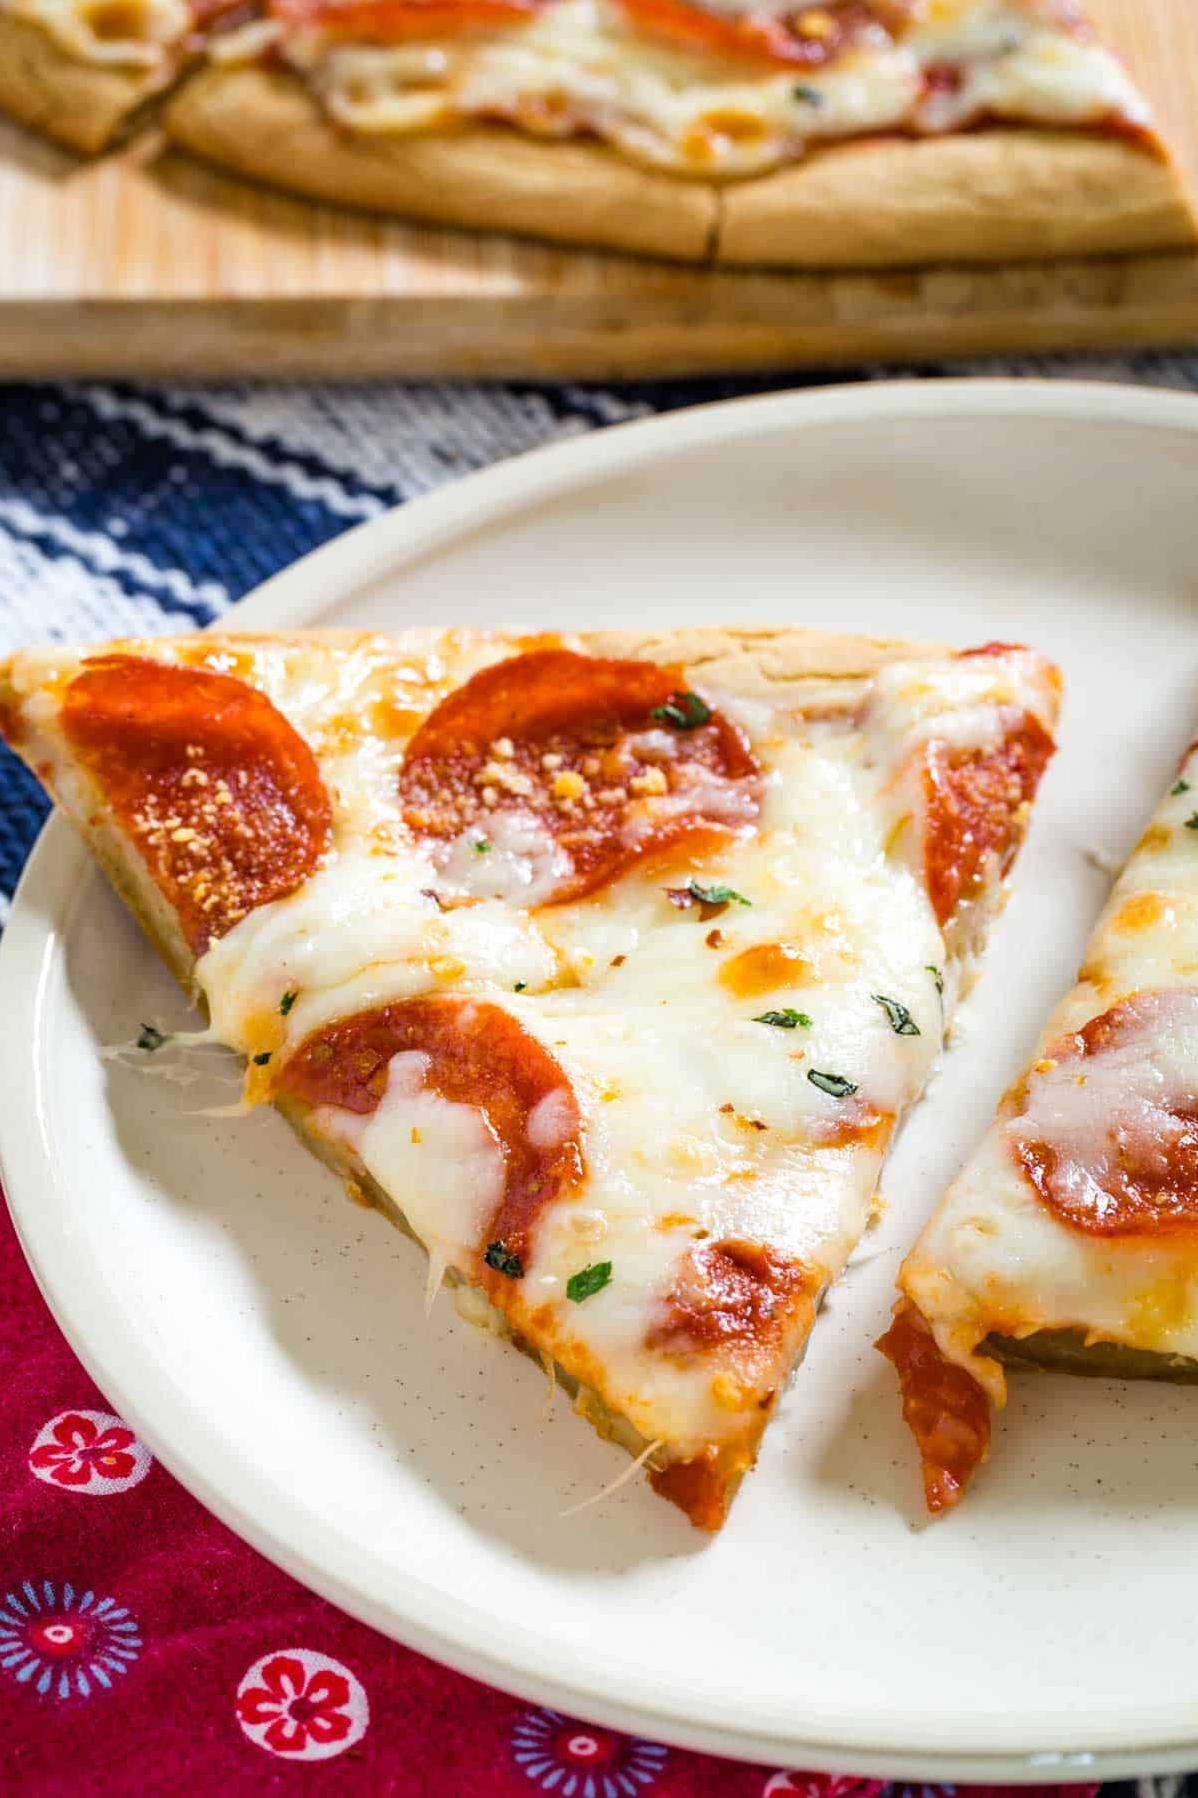  Who knew gluten-free could taste this good? Deliciously savory pepperonis atop a golden crust.